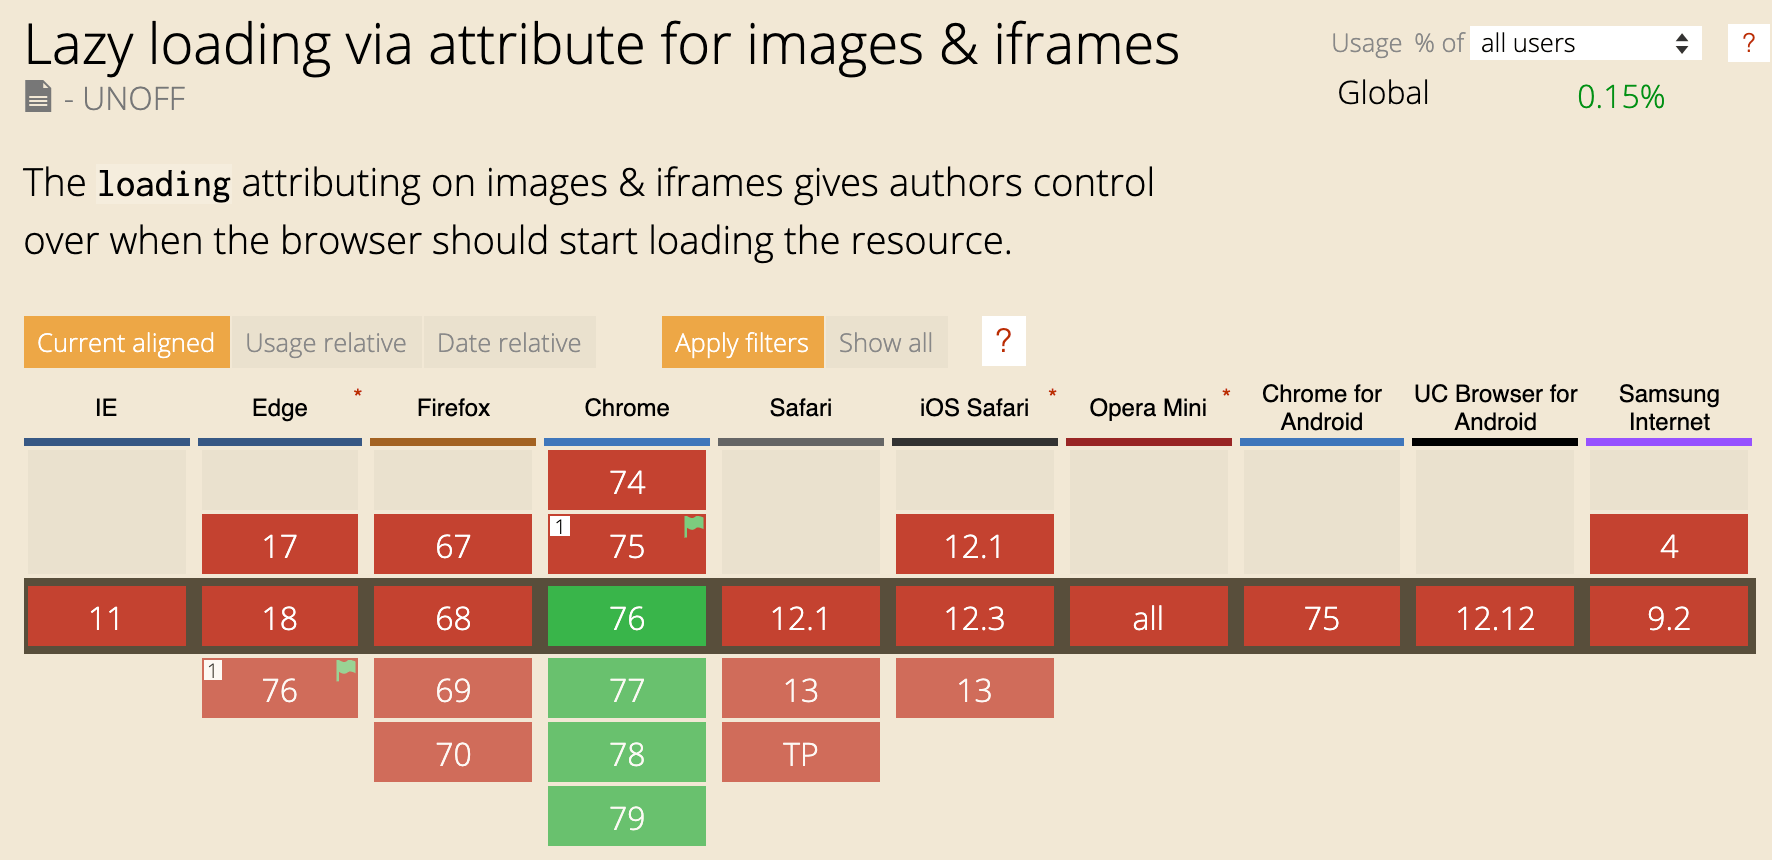 Native image lazy loading has landed in Chrome, maybe don't use it